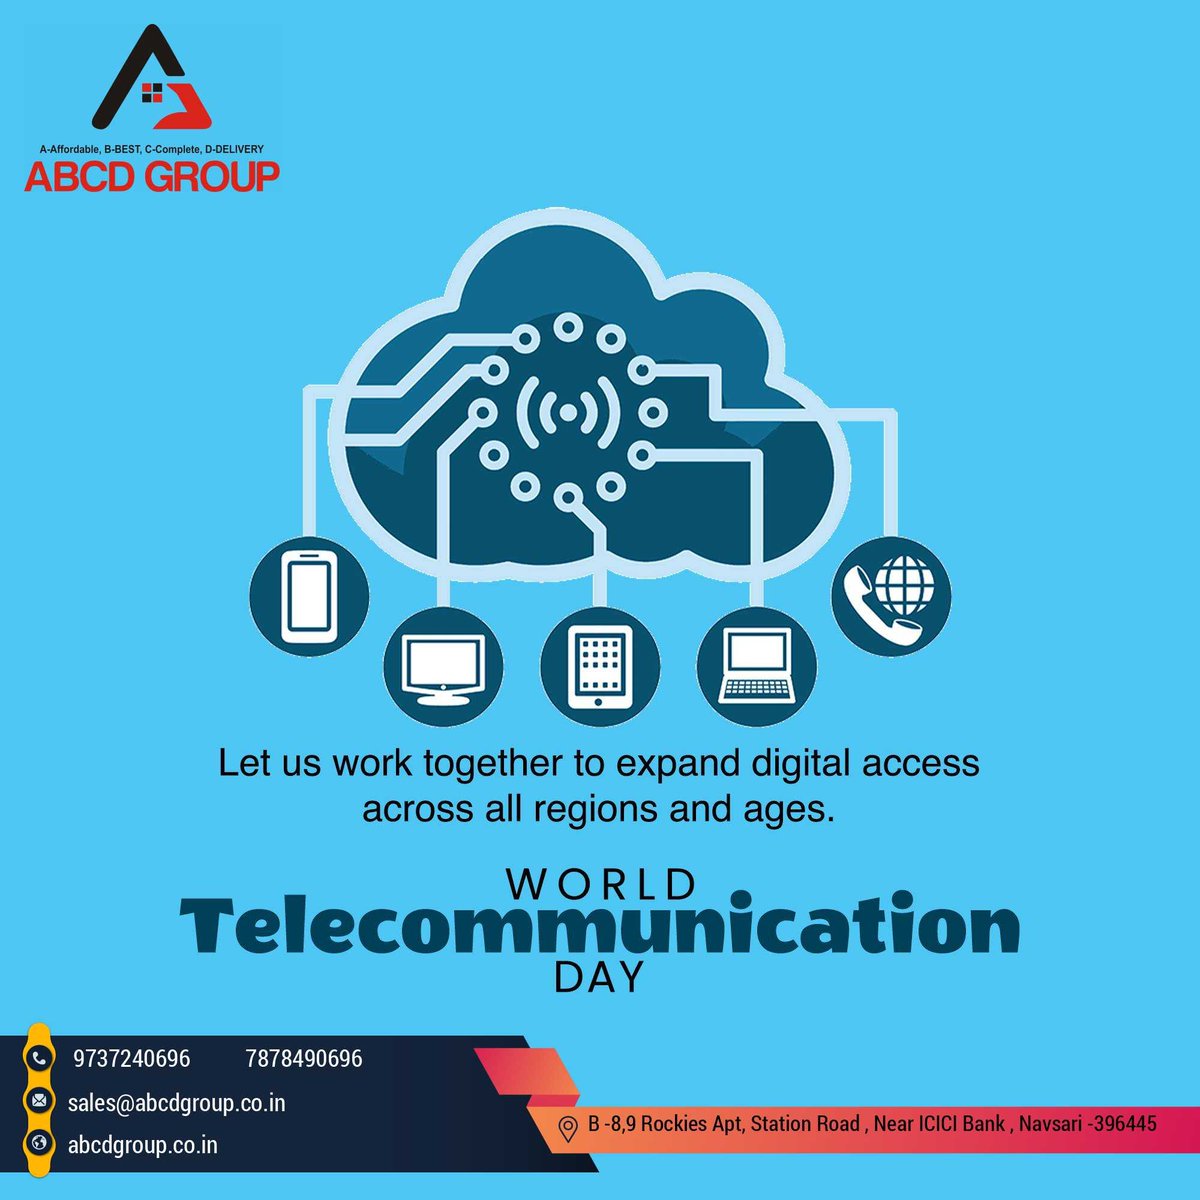 Greetings from ABCD GROUP
                    #DigitalEconomy #DigitalTransformation #TelecomServices #InformationSociety #GlobalCommunication #DigitalInclusion #TelecomIndustry #SustainableDevelopment #SmartCities #WTDC